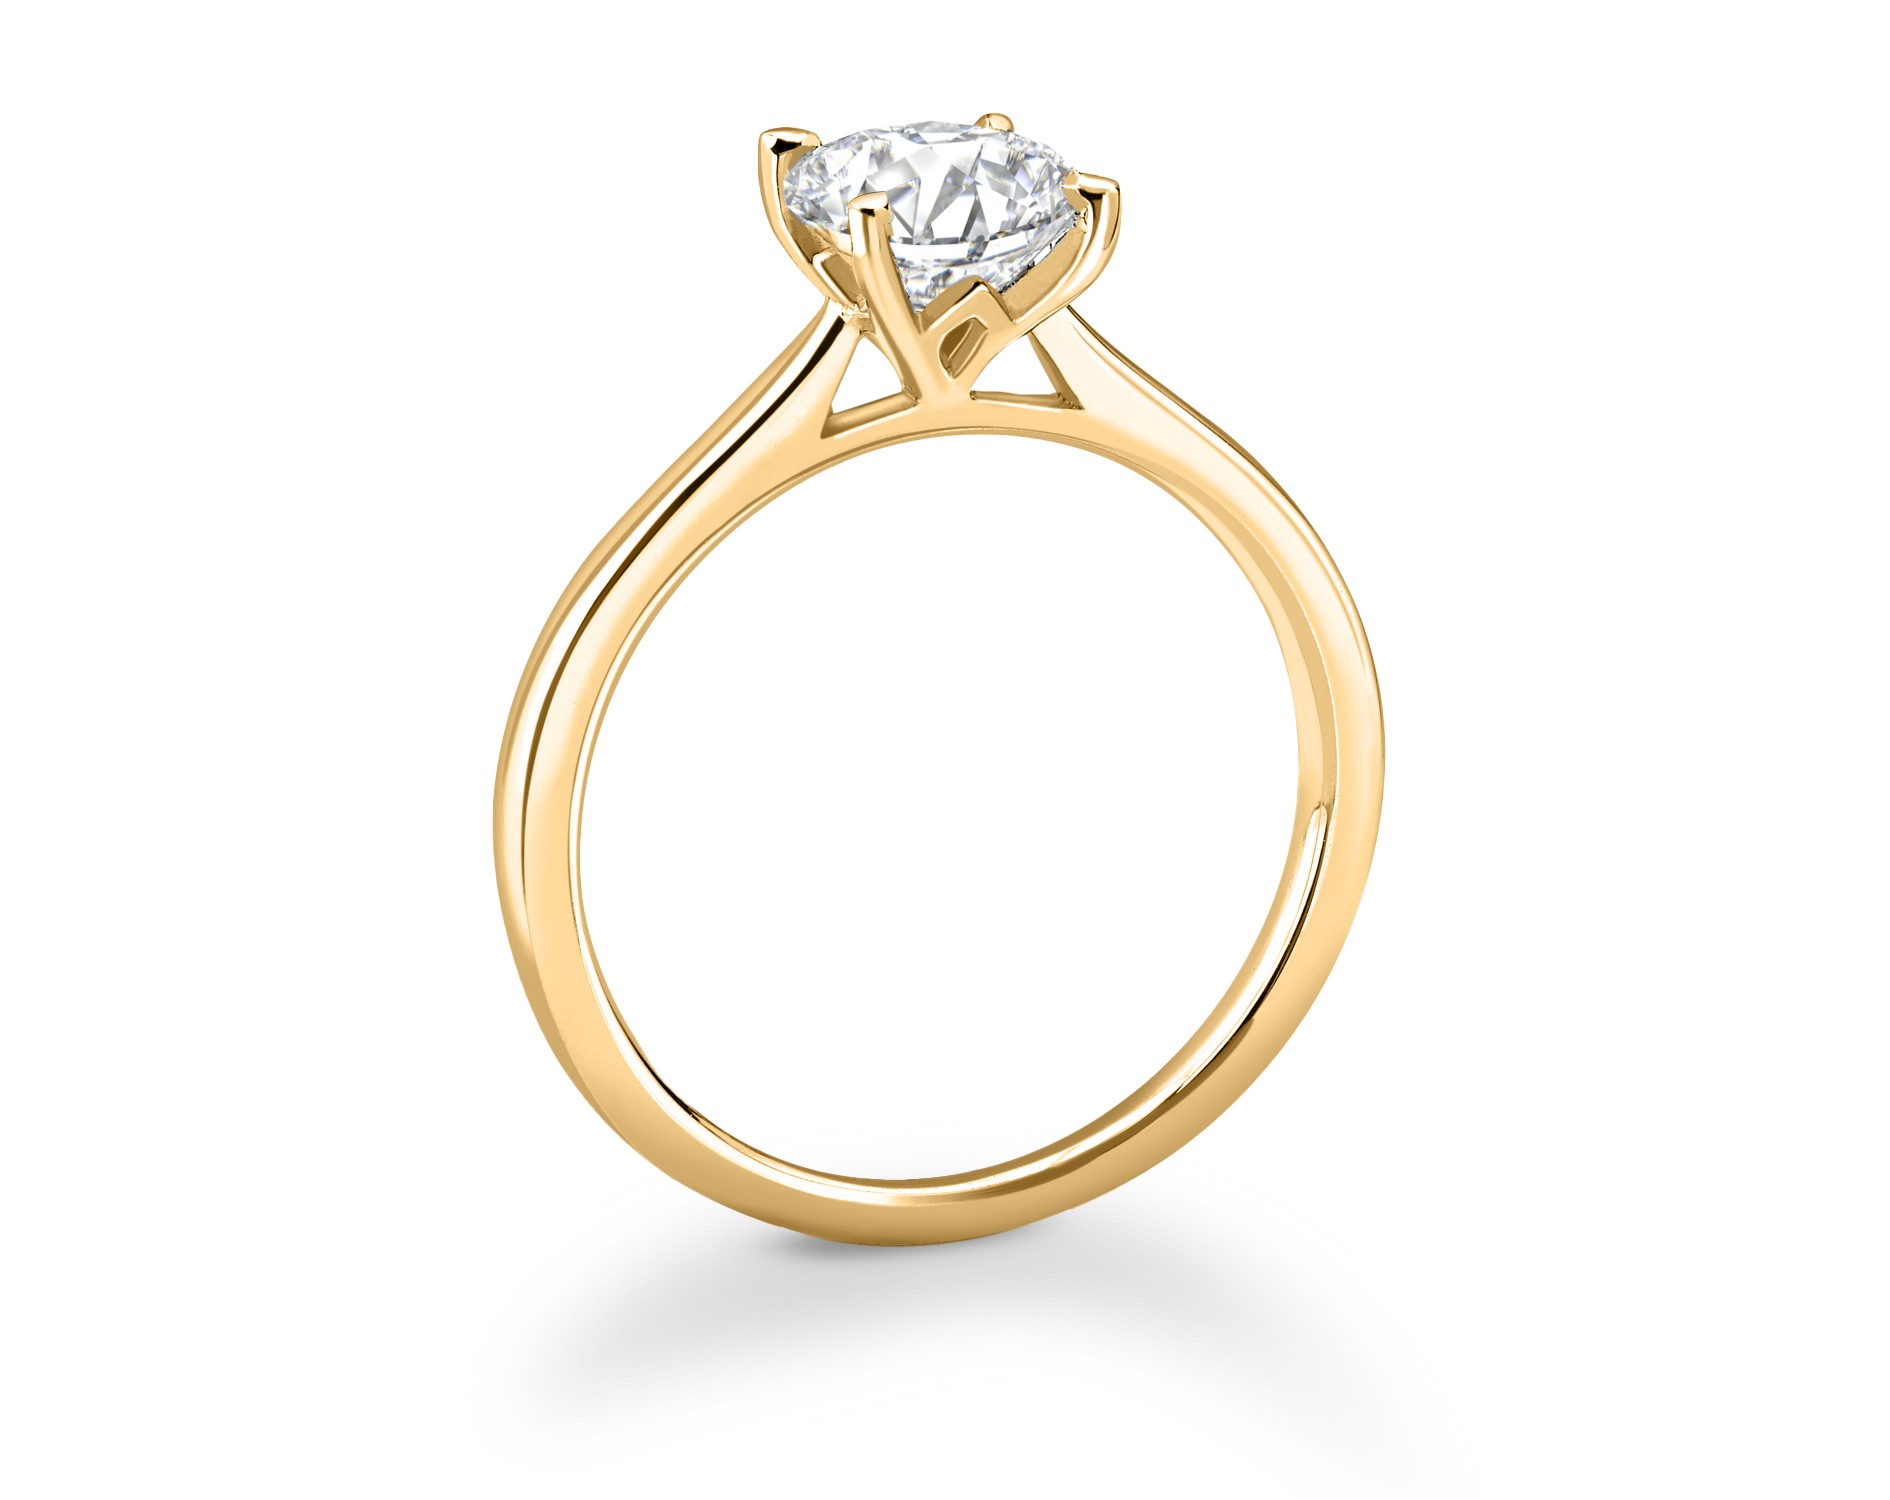 18K YELLOW GOLD ROUND CUT 4 PRONGS SOLITAIRE DIAMOND ENGAGEMENT RING